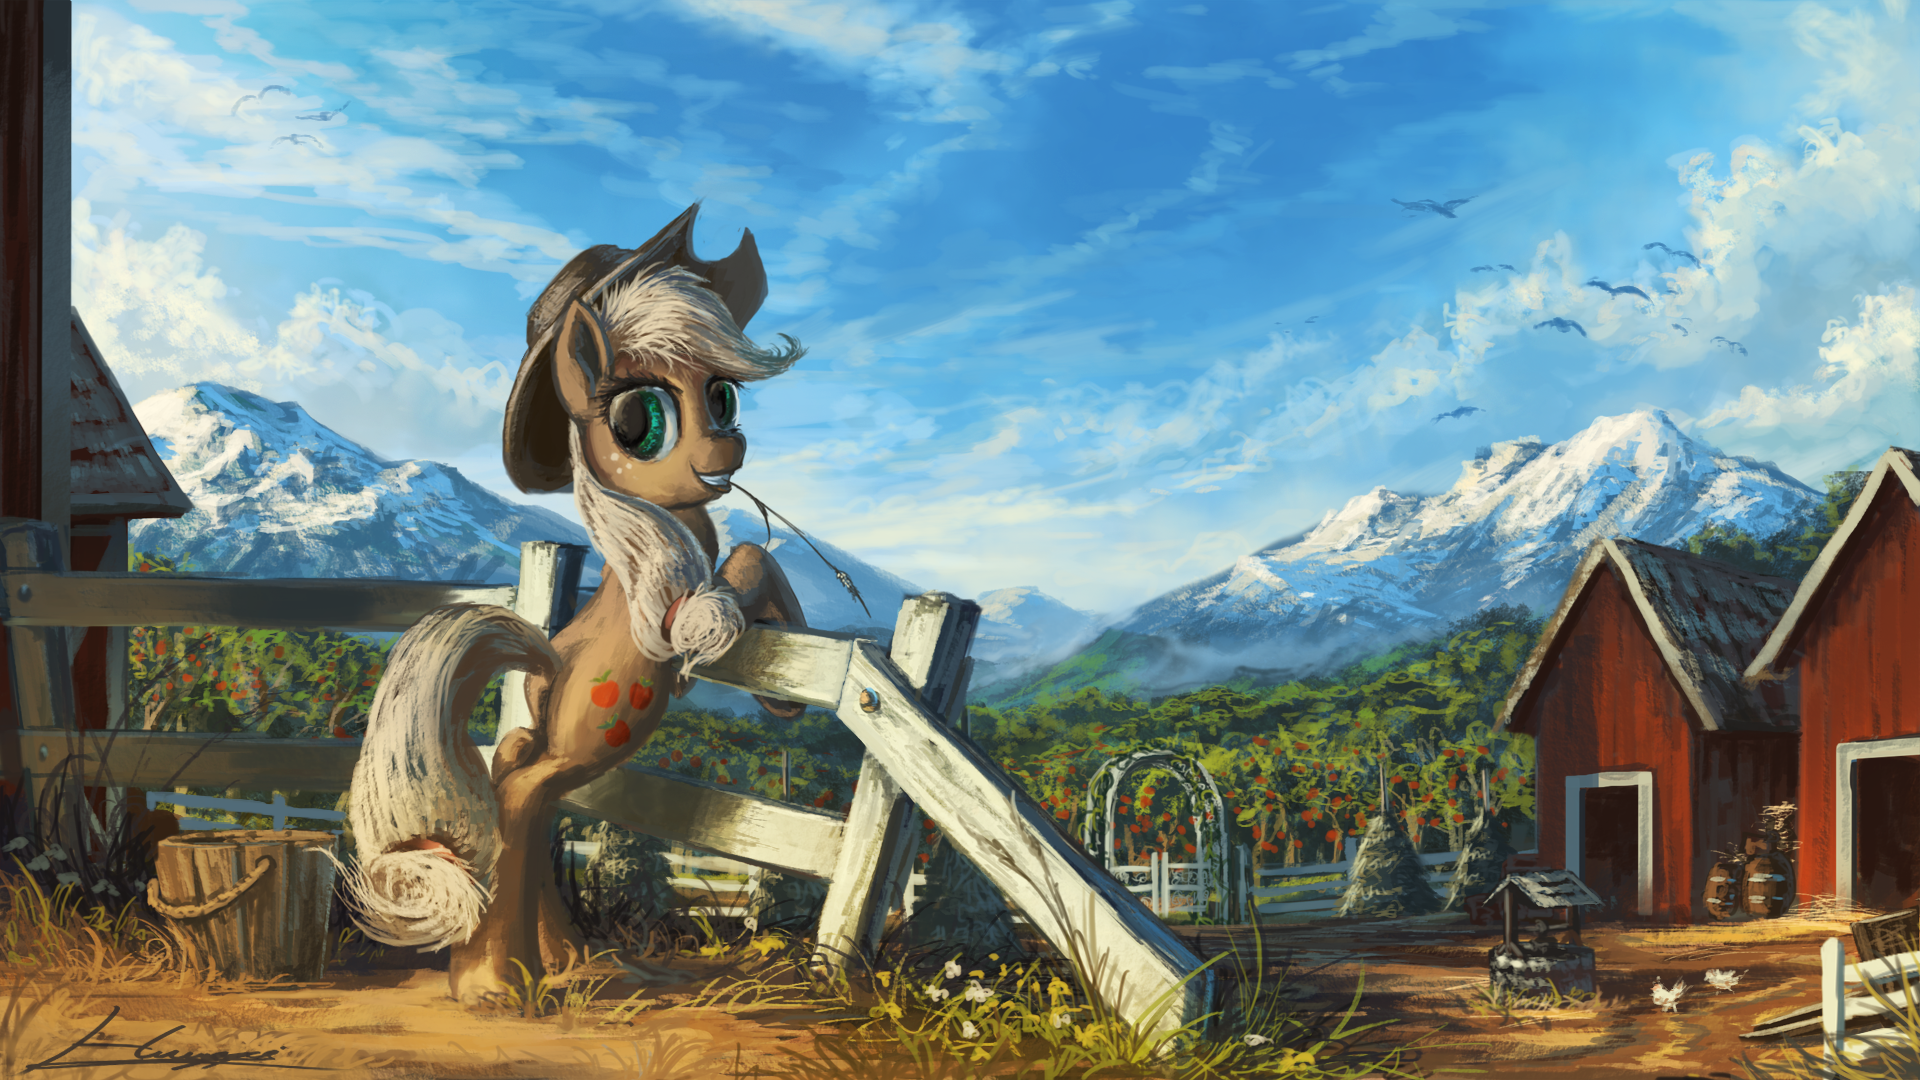 MLP - Sweet Apple Acres by Huussii